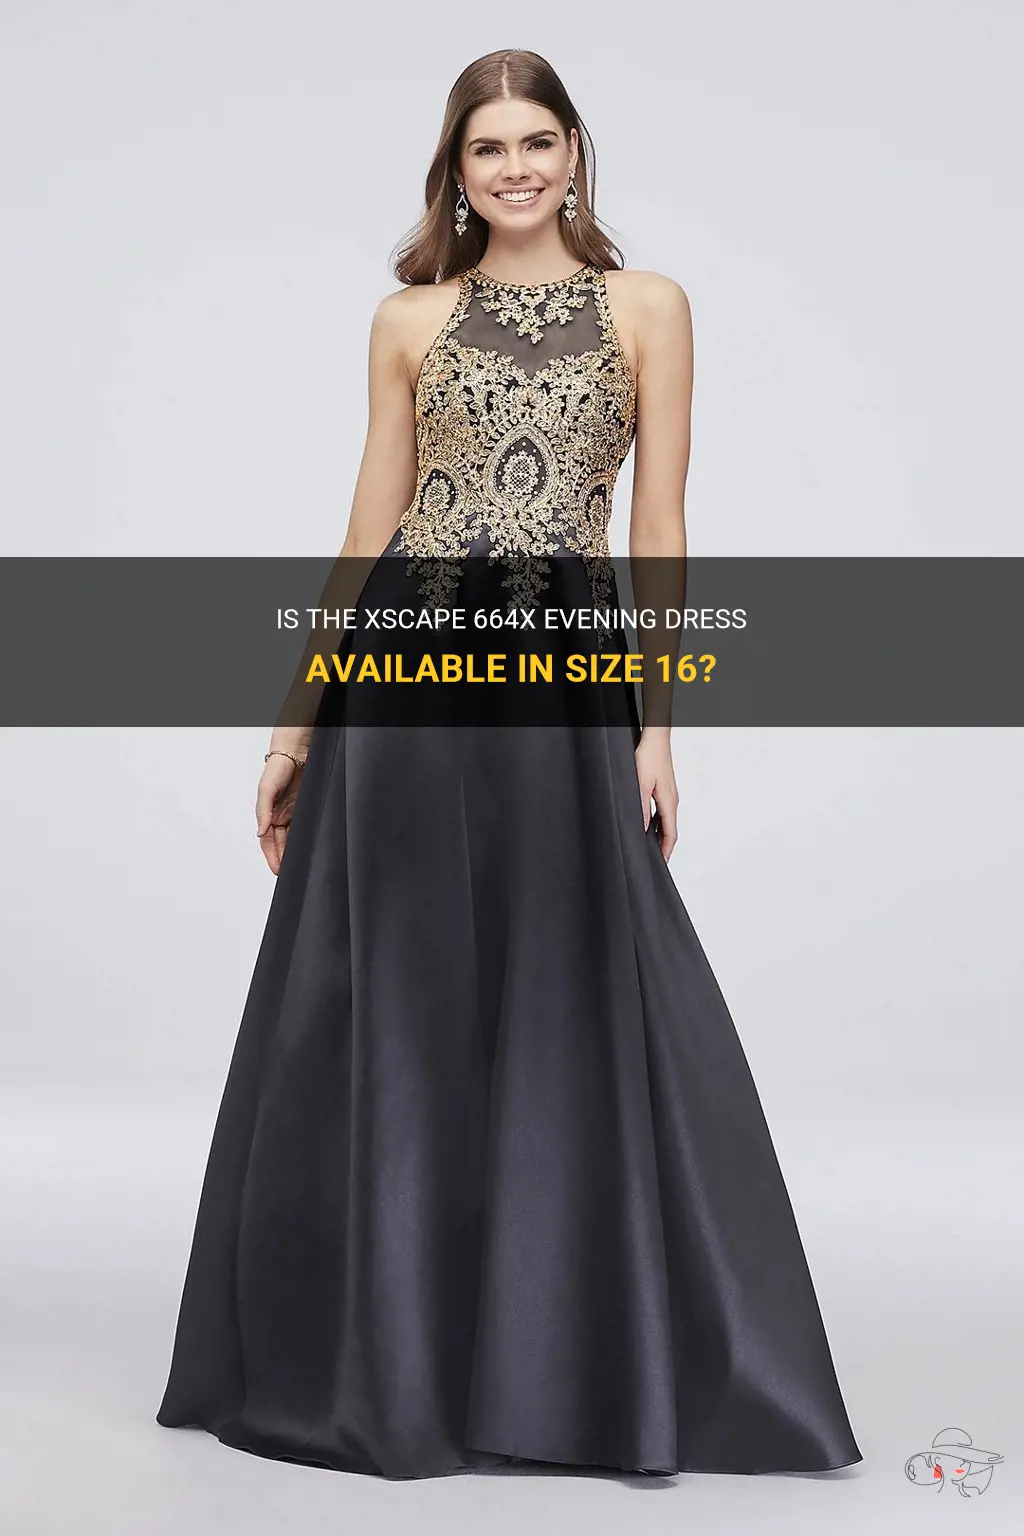 does evening dress xscape 664x come in size 16